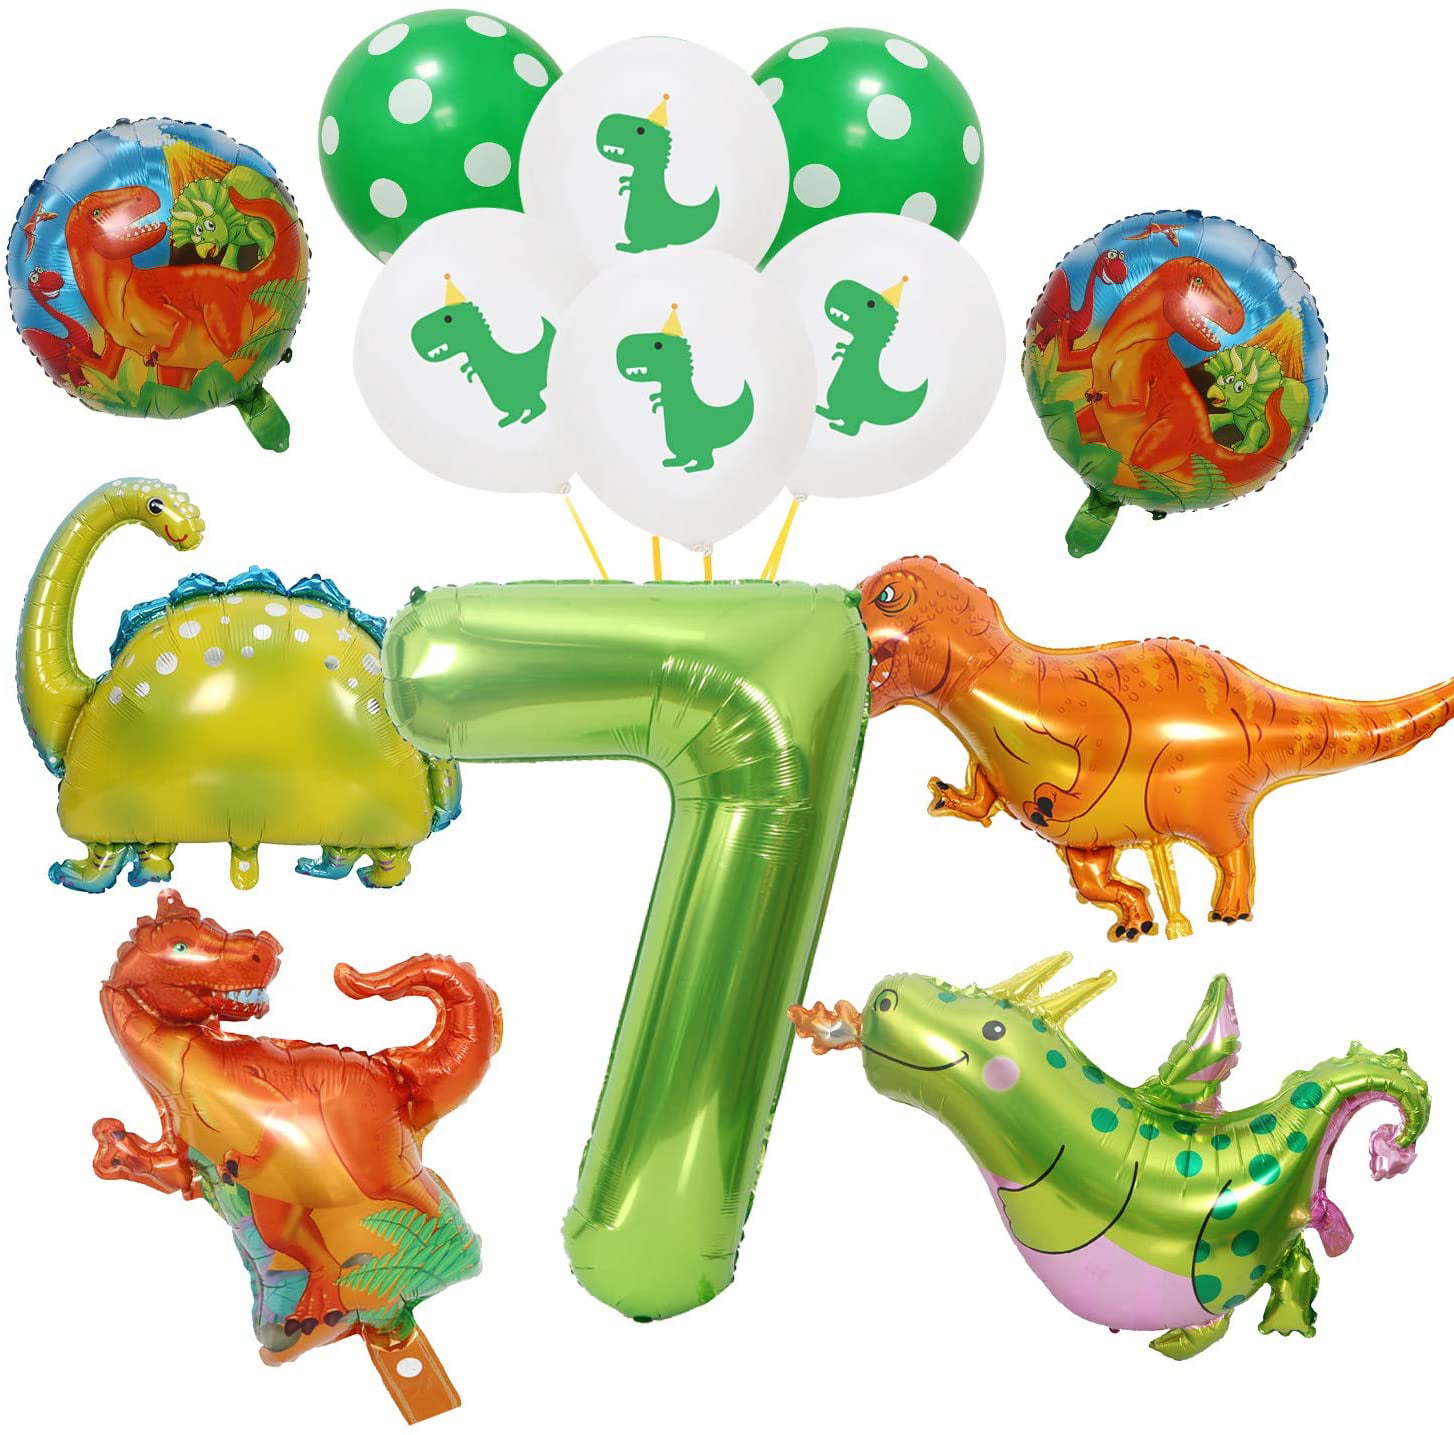 Details about   Dinosaur Foil Ballons Birthday Decor Party Supplies Kids Boys Baby Shower Toy D 